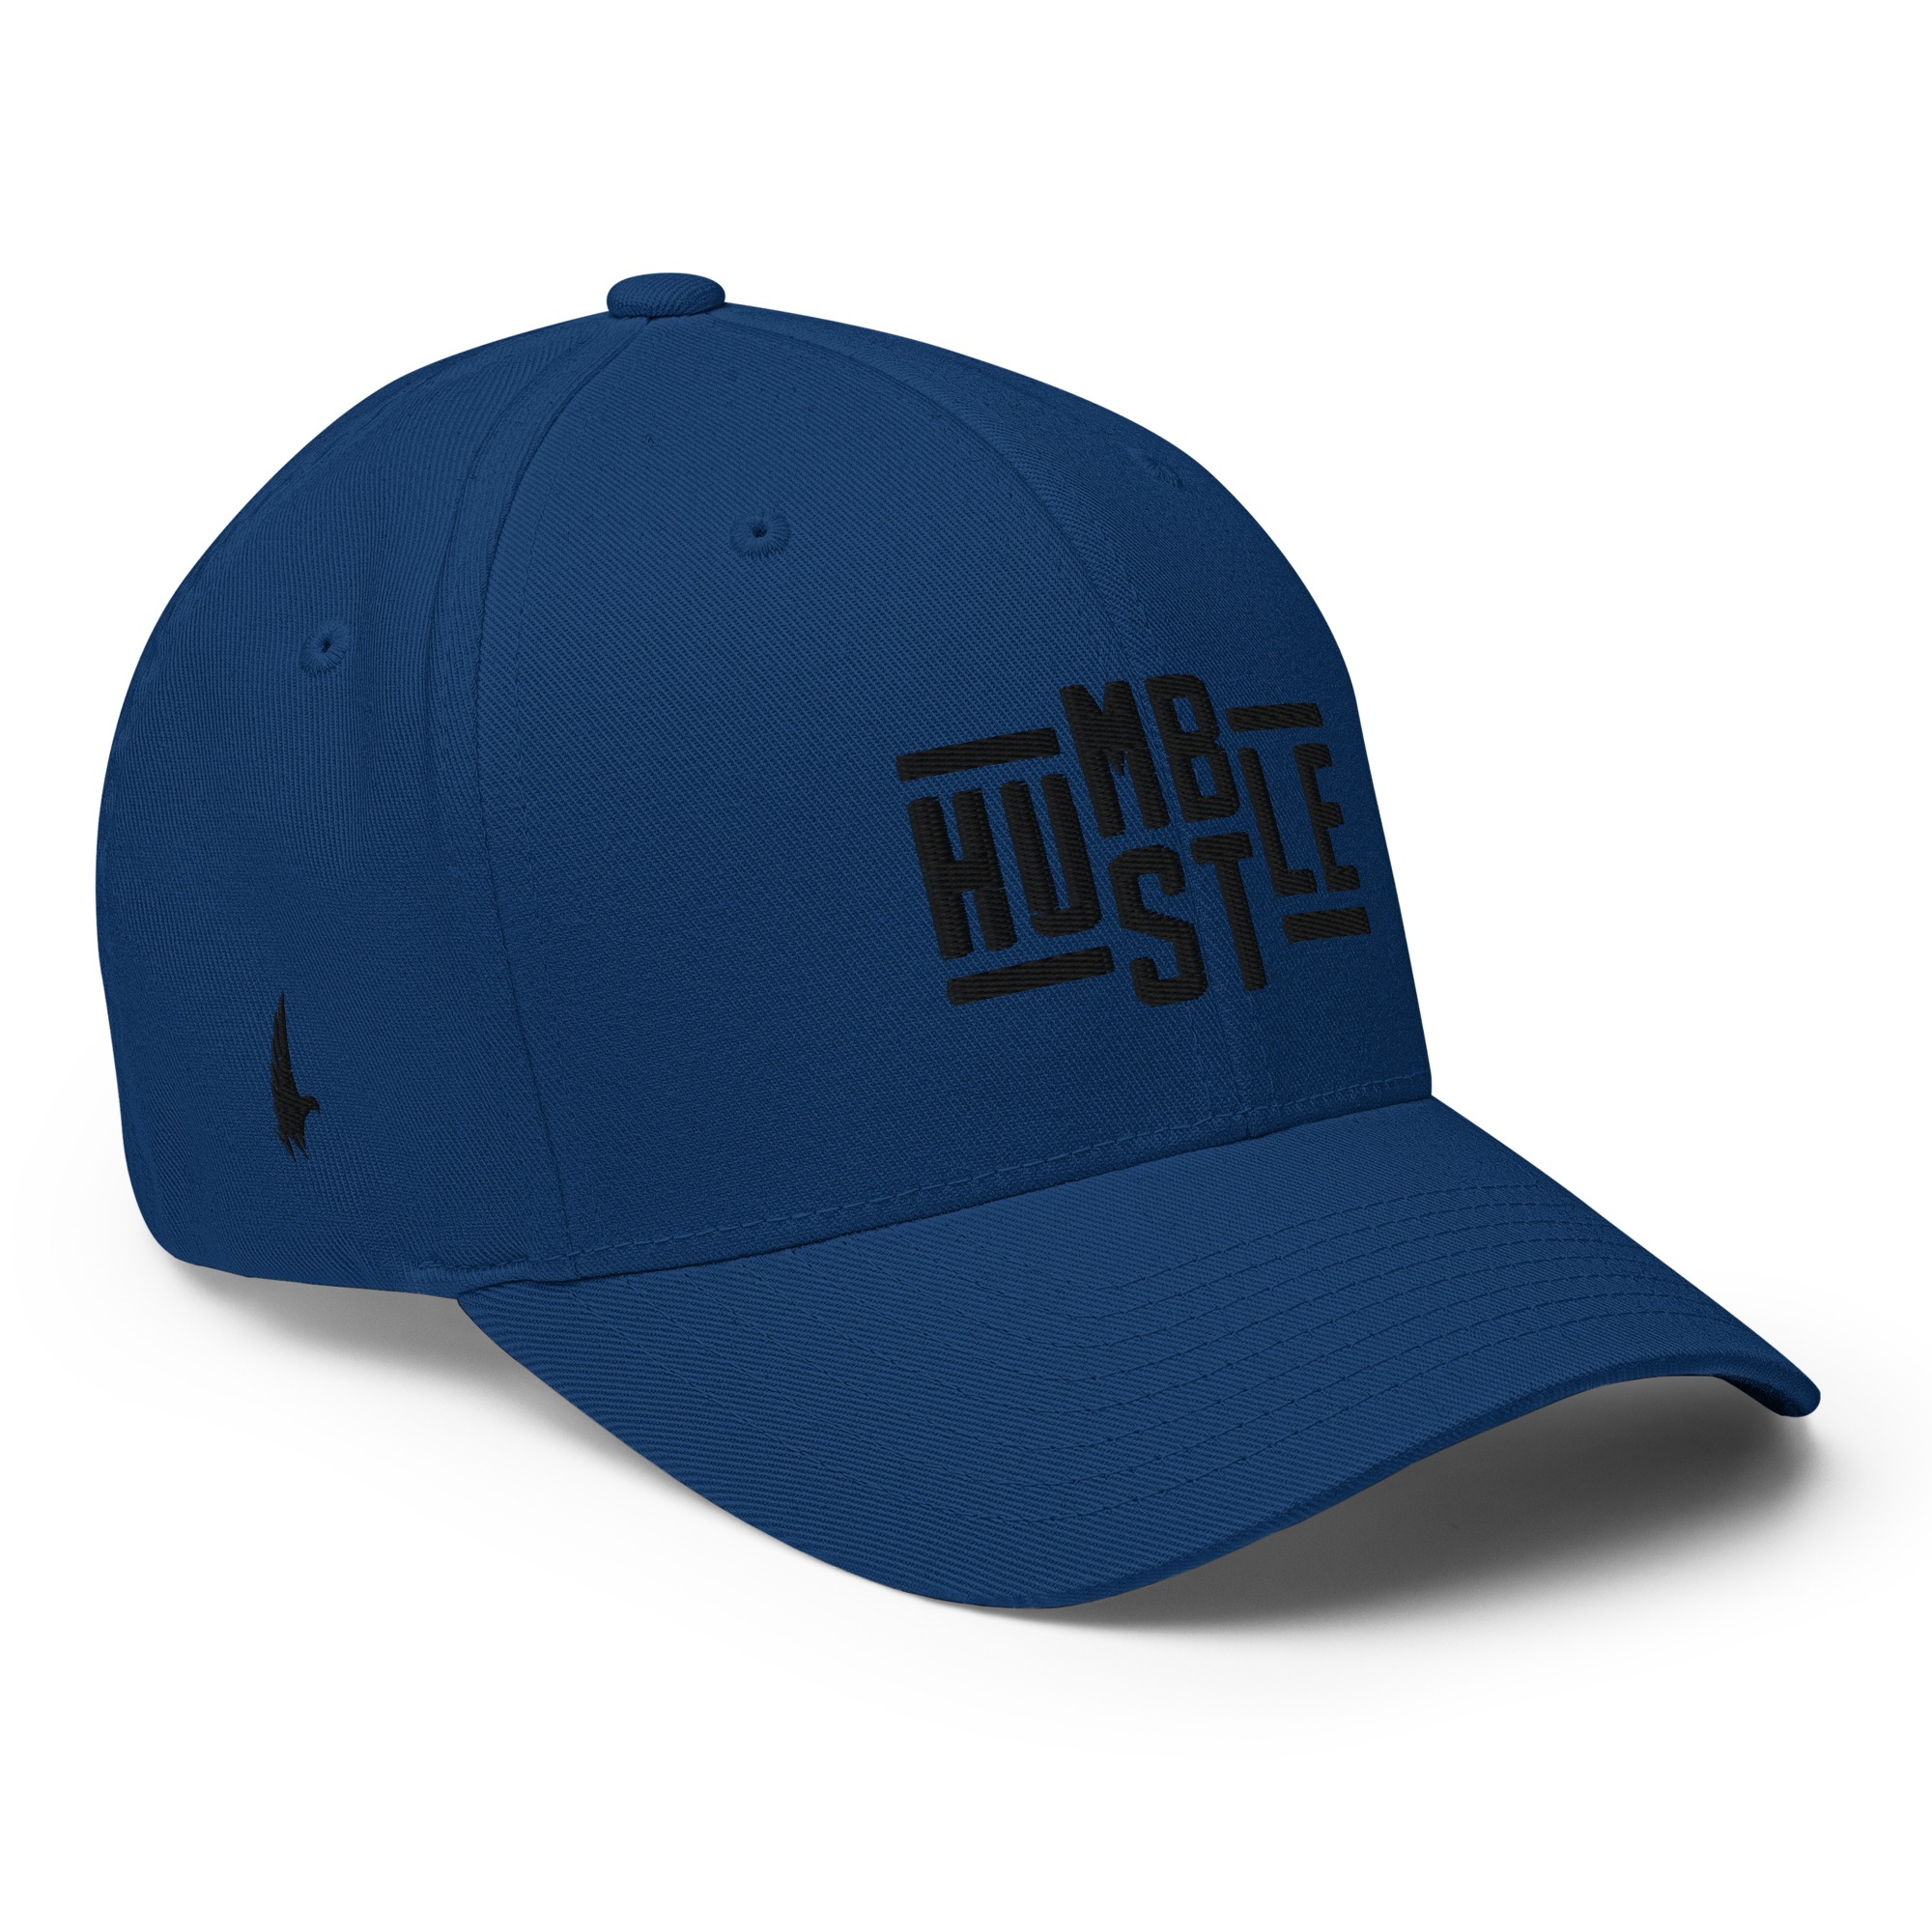 Loyalty Vibes Hustle Fitted Hat - Blue / Black Fitted - Loyalty Vibes